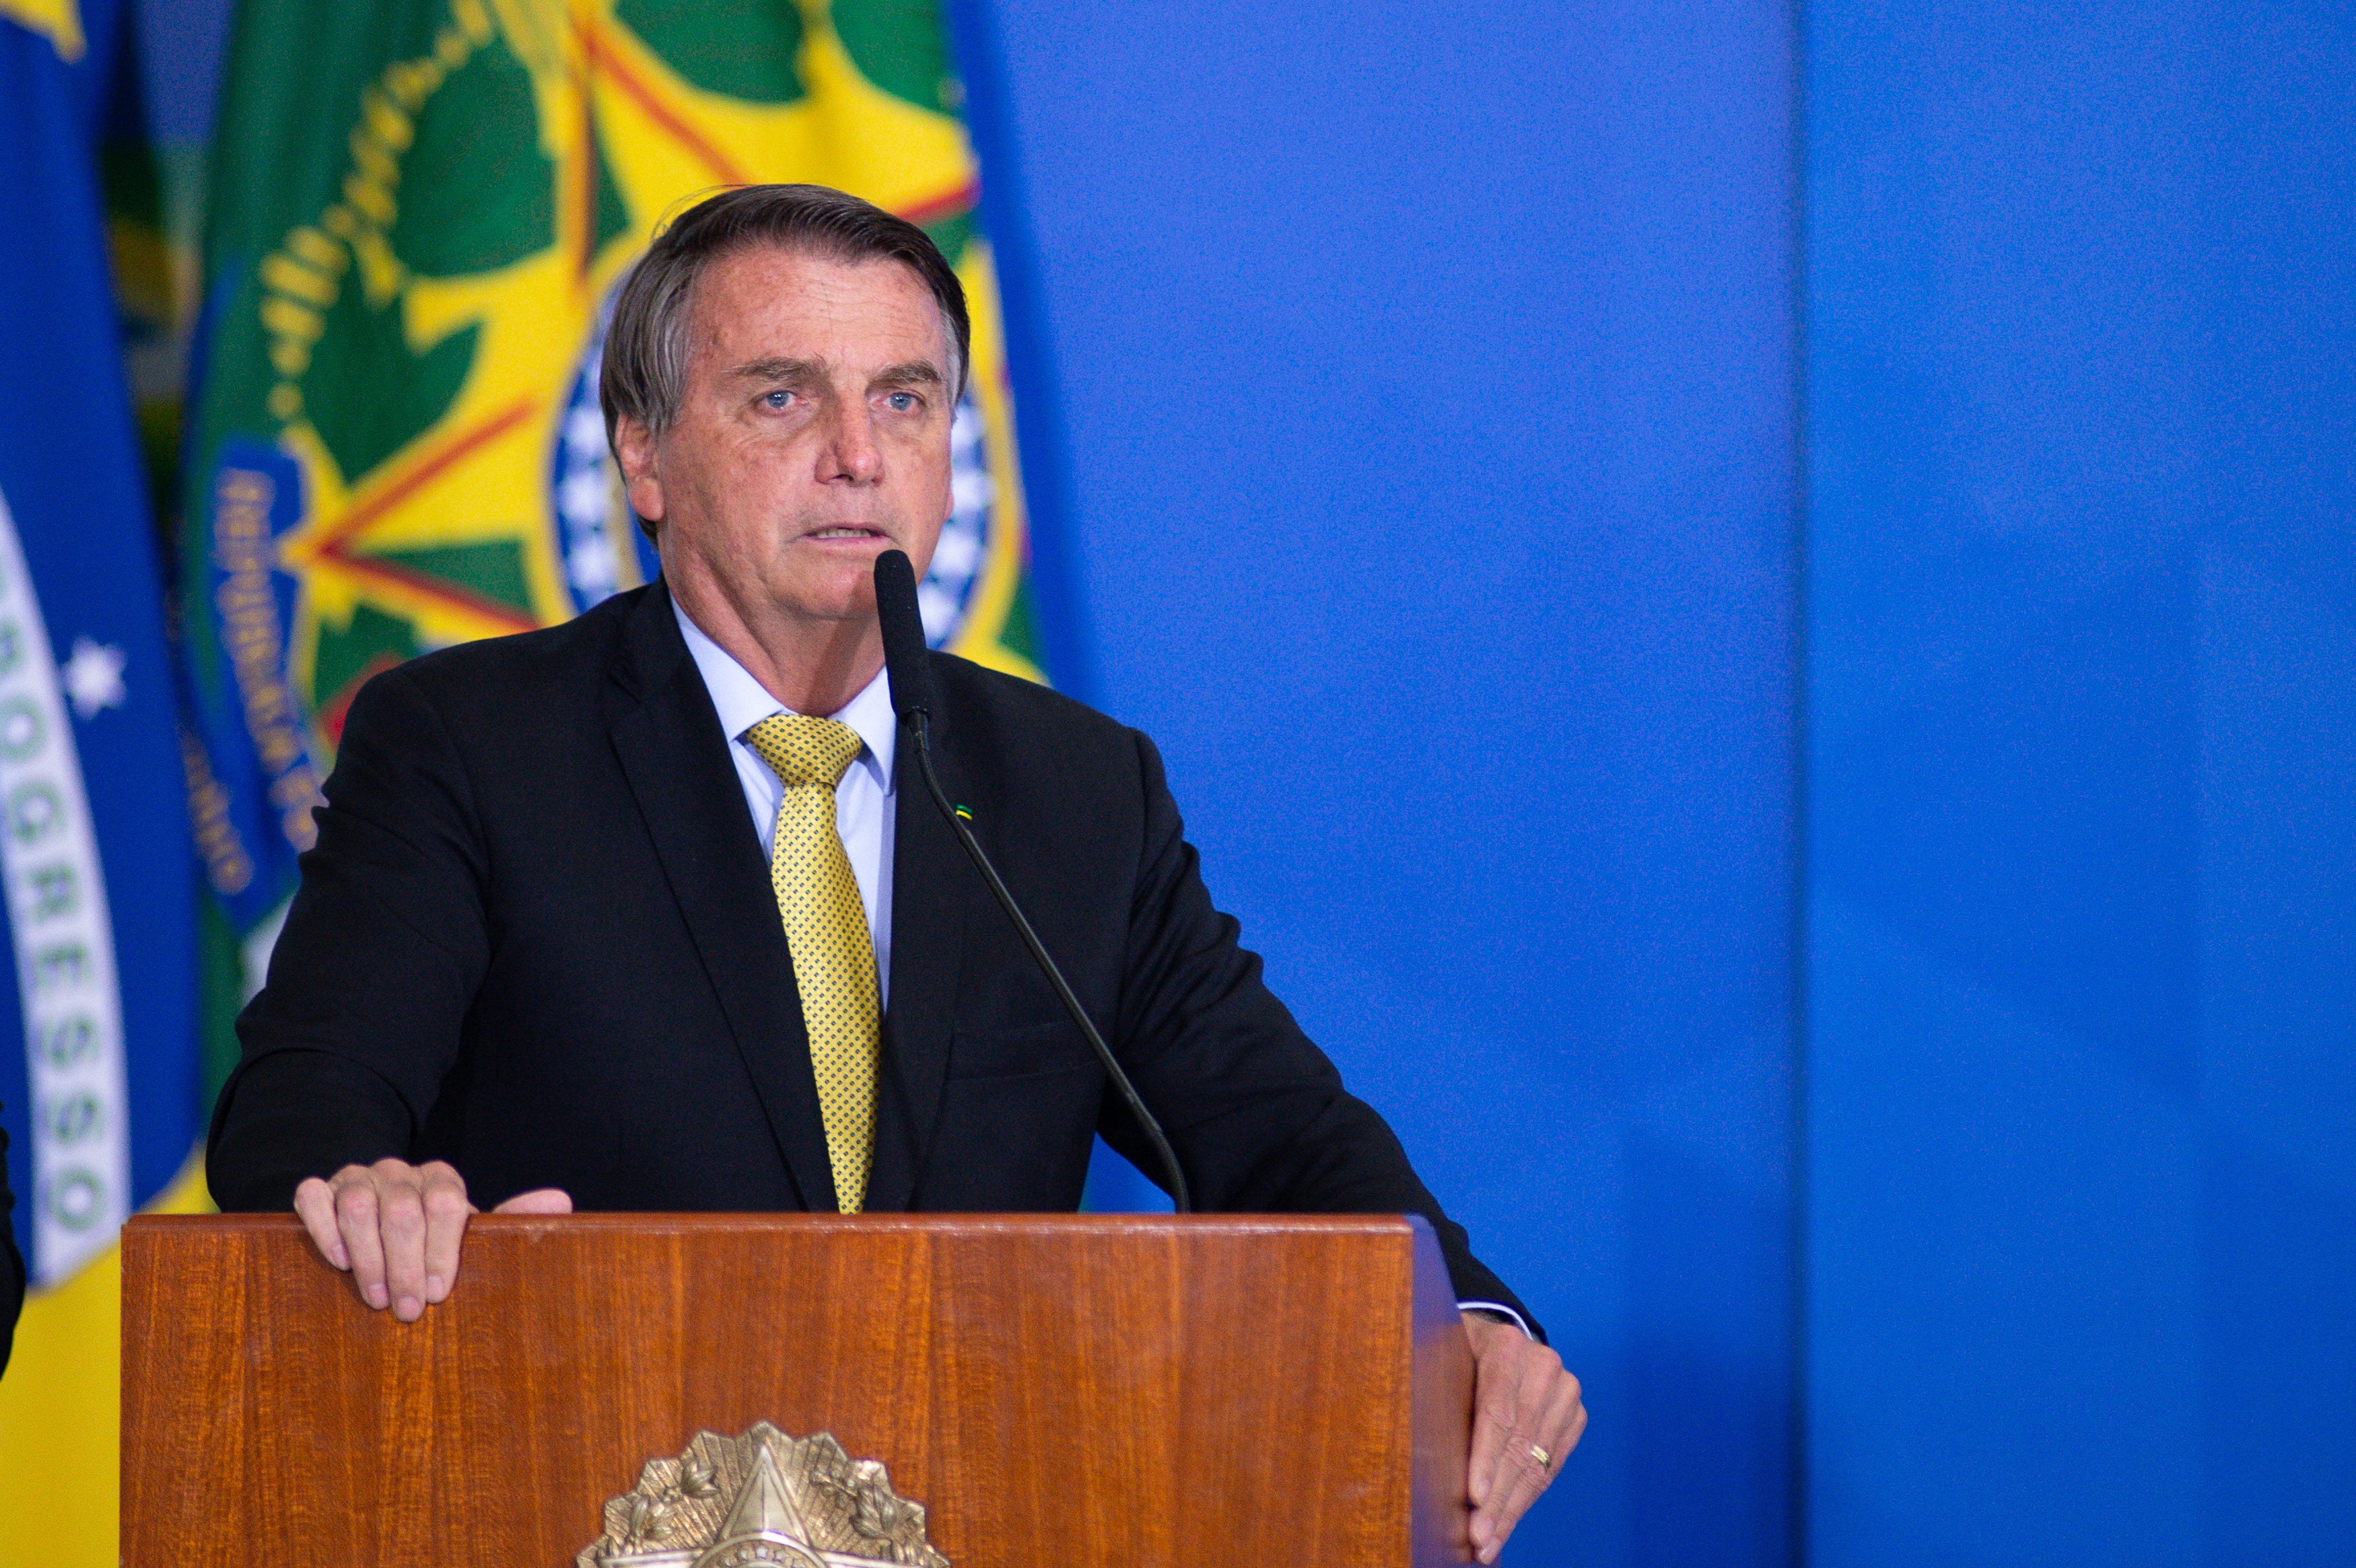 President of Brazil Jair Bolsonaro speaks during an event to launch a new register for professional workers of the fish industry at Planalto Government Palace on 29 June 2021 in Brasilia, Brazil